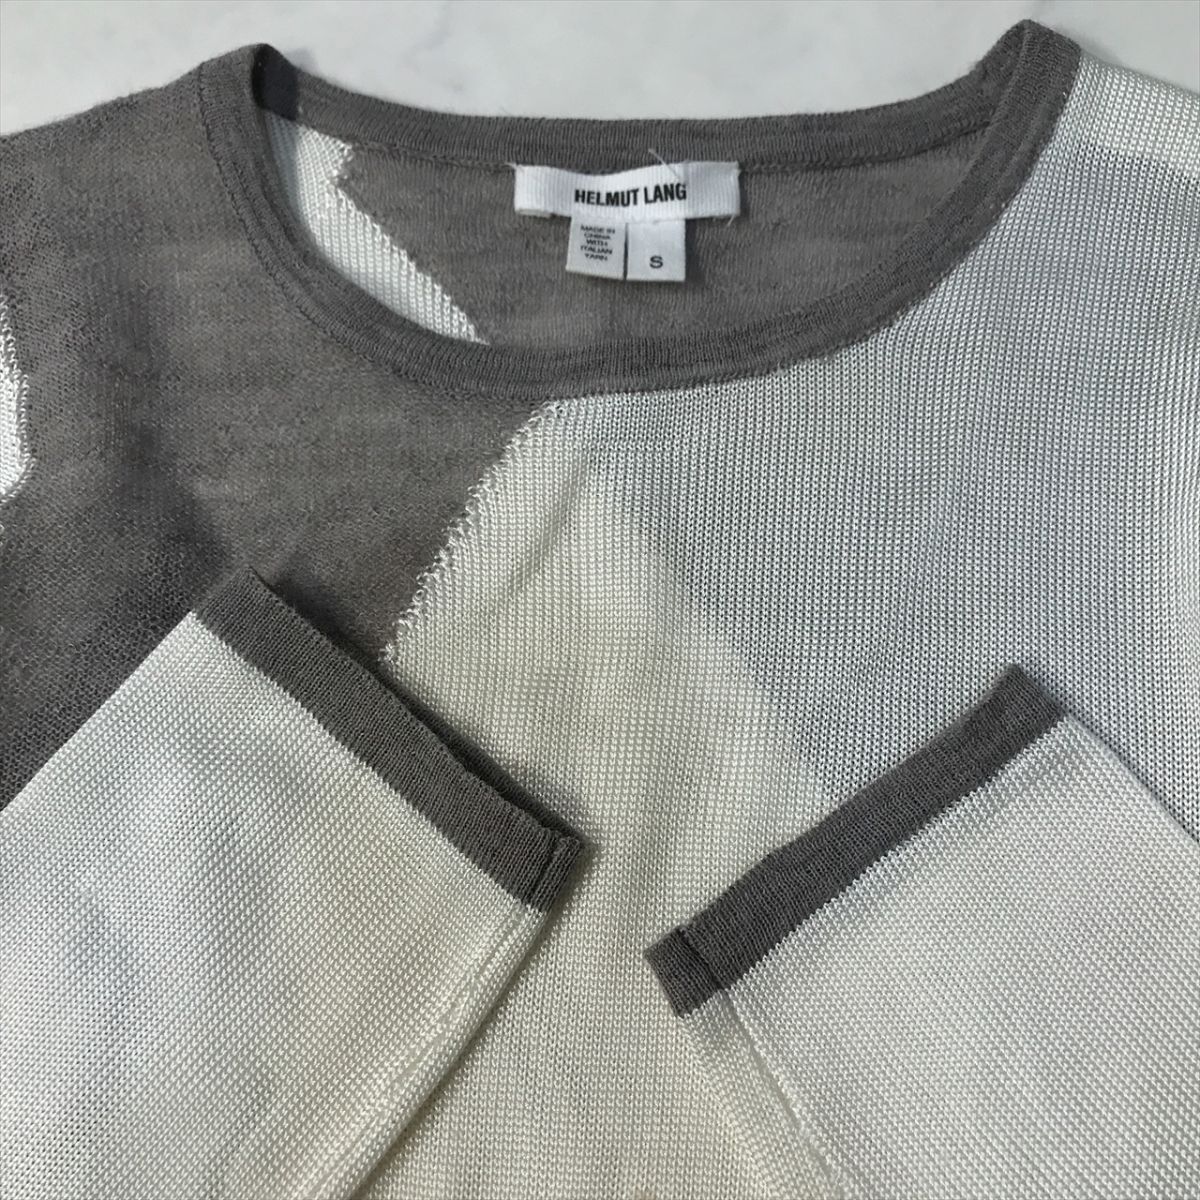 { superior article *}HELMUTLANG hell Mustang * design * knitted cut and sewn * white / gray * size S(MA6330)*S60